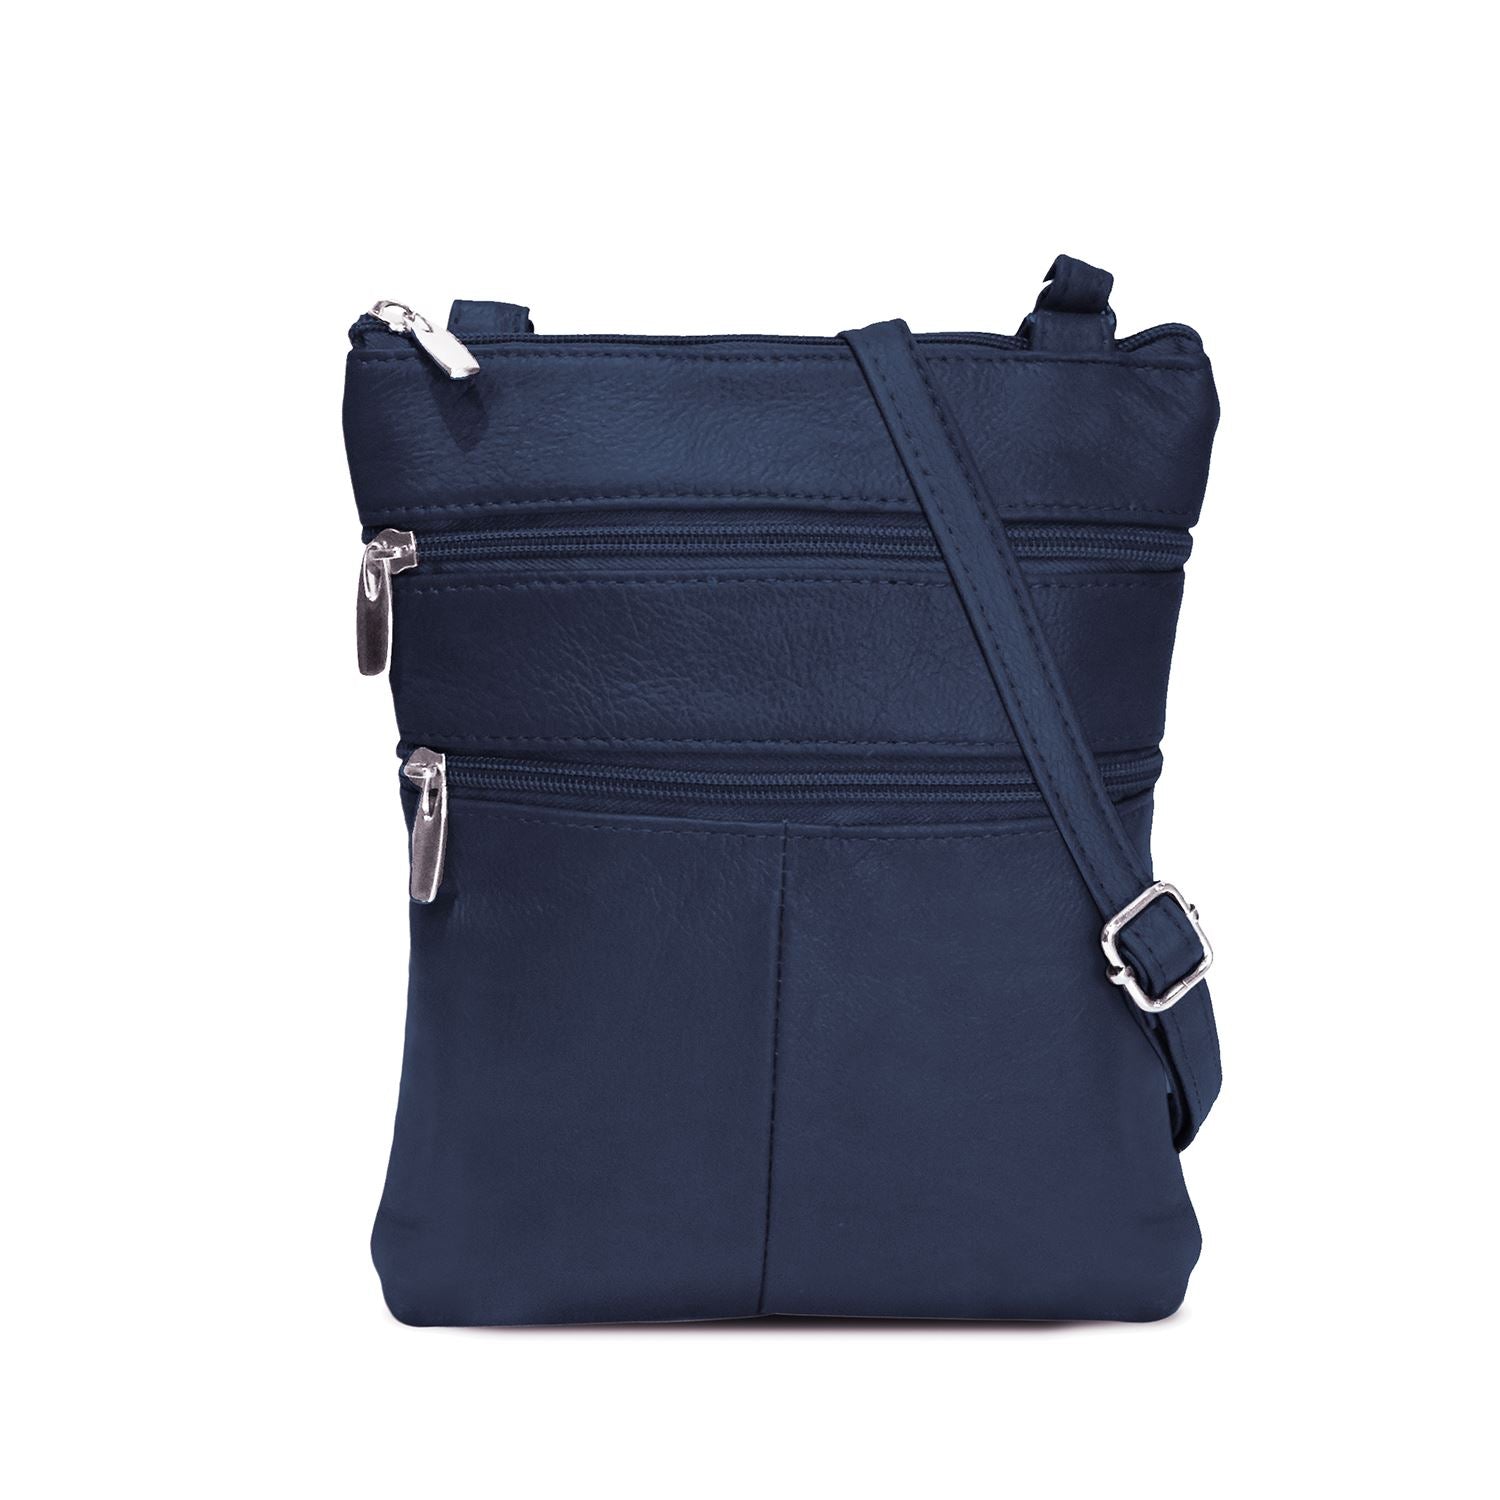 Leather Zippers Crossbody Bag-Assorted Colors for Women Navy Blue